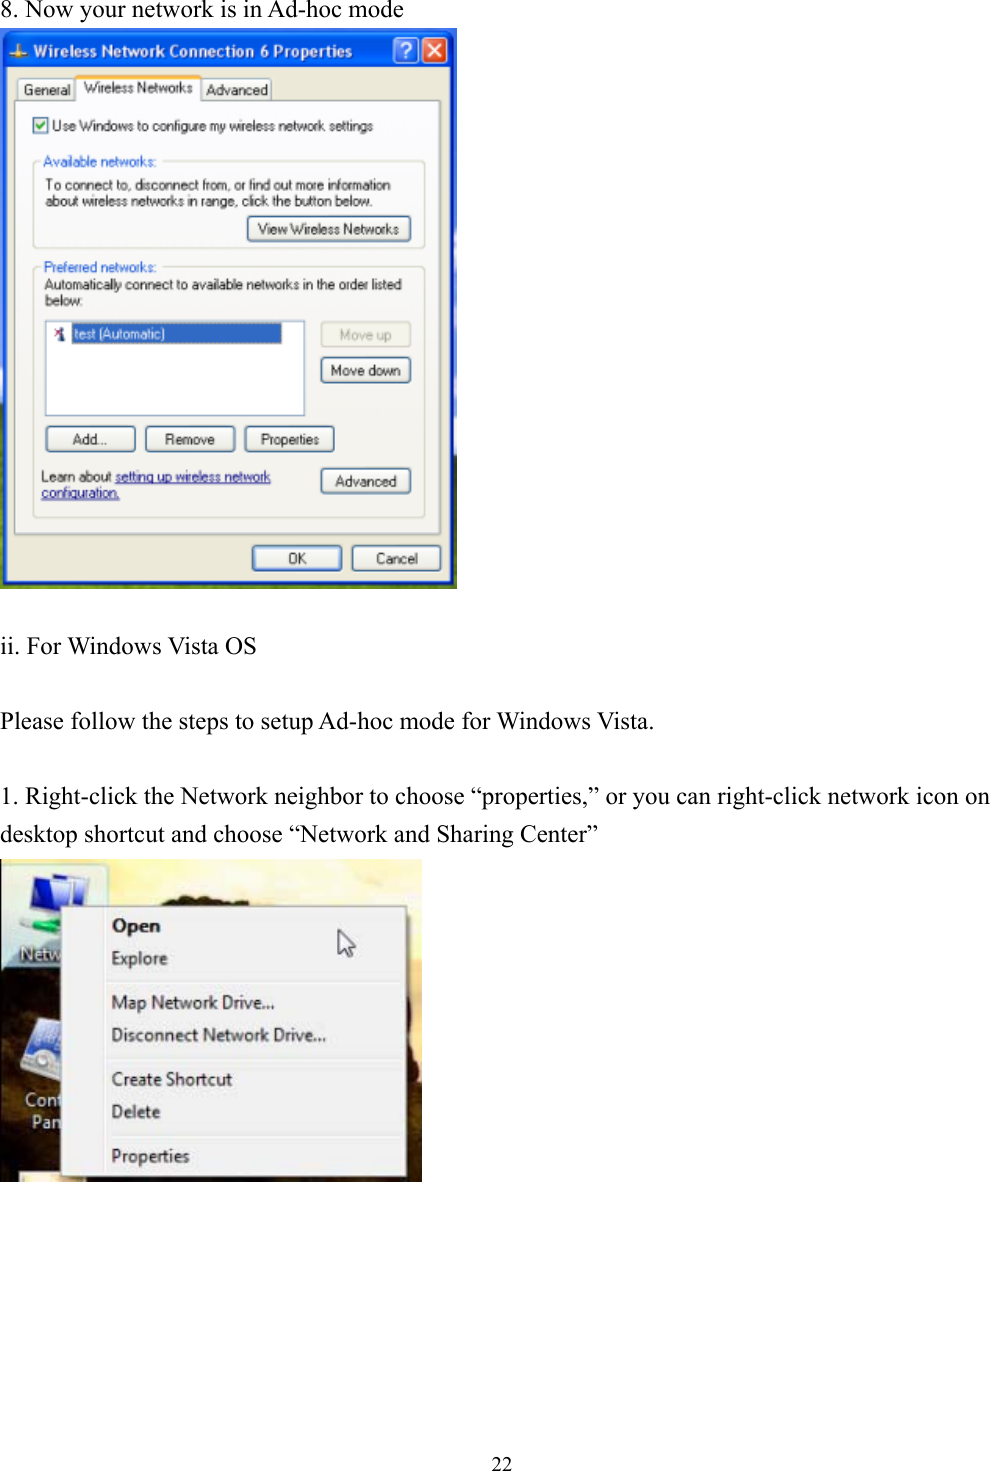 228. Now your network is in Ad-hoc mode ii. For Windows Vista OSPlease follow the steps to setup Ad-hoc mode for Windows Vista. 1. Right-click the Network neighbor to choose “properties,” or you can right-click network icon on desktop shortcut and choose “Network and Sharing Center” 